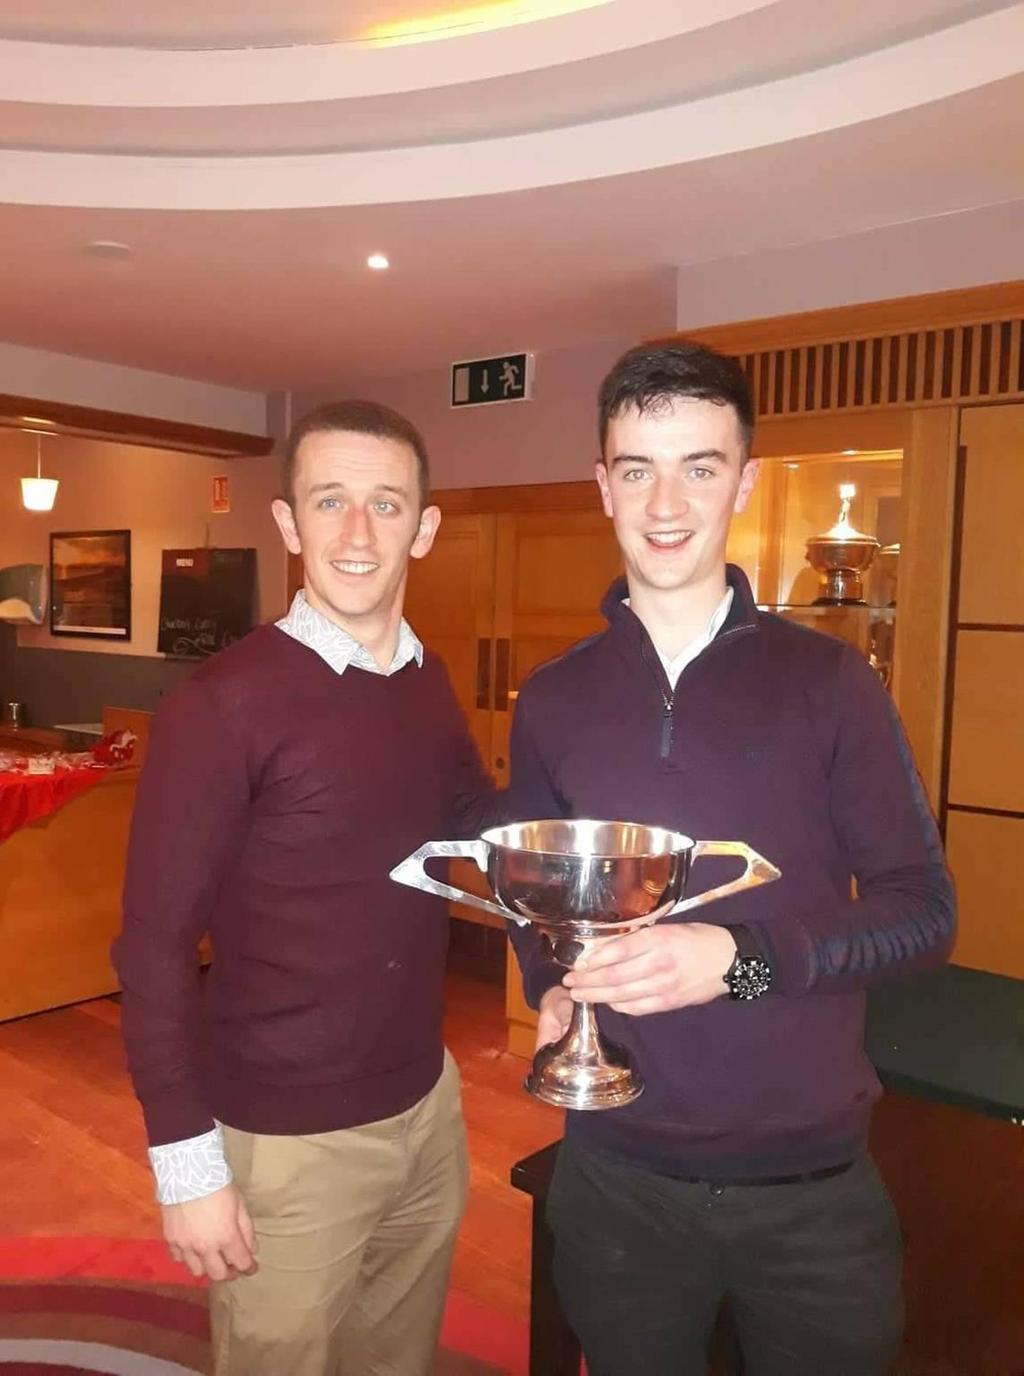 Neafsey Cup 2018 results Winner James Creed 28 points 2 nd Pat Devaney 28 points (B6) 3 rd Ruairi O Connor 25 points 4 th Simon Rooney 25 points (B6) 5 th David Brady 25 points (B6) 6 th Mark